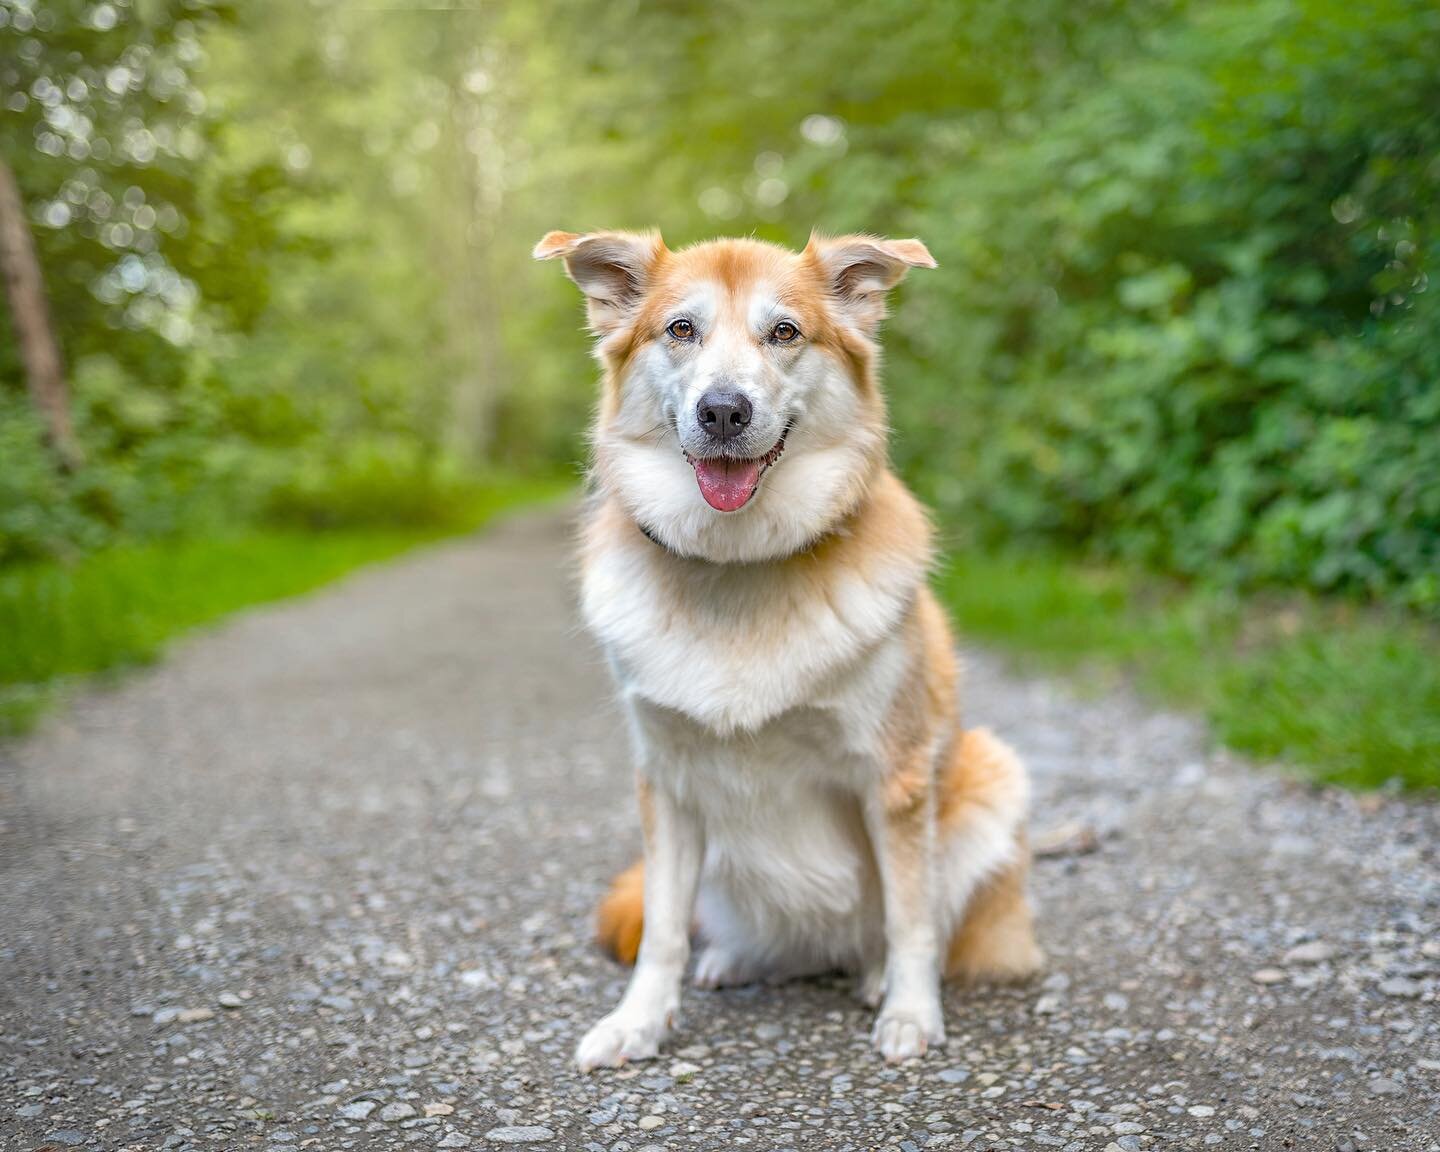 I adore this face! Meet Miss Beaners 🤩 

She is a 9 year old golden/husky mix. She&rsquo;s the sweetest, calmer girl and the best model. She was patiently posing for me and that smile just warmed my heart ❤️ isn&rsquo;t she gorgeous? 

If you&rsquo;